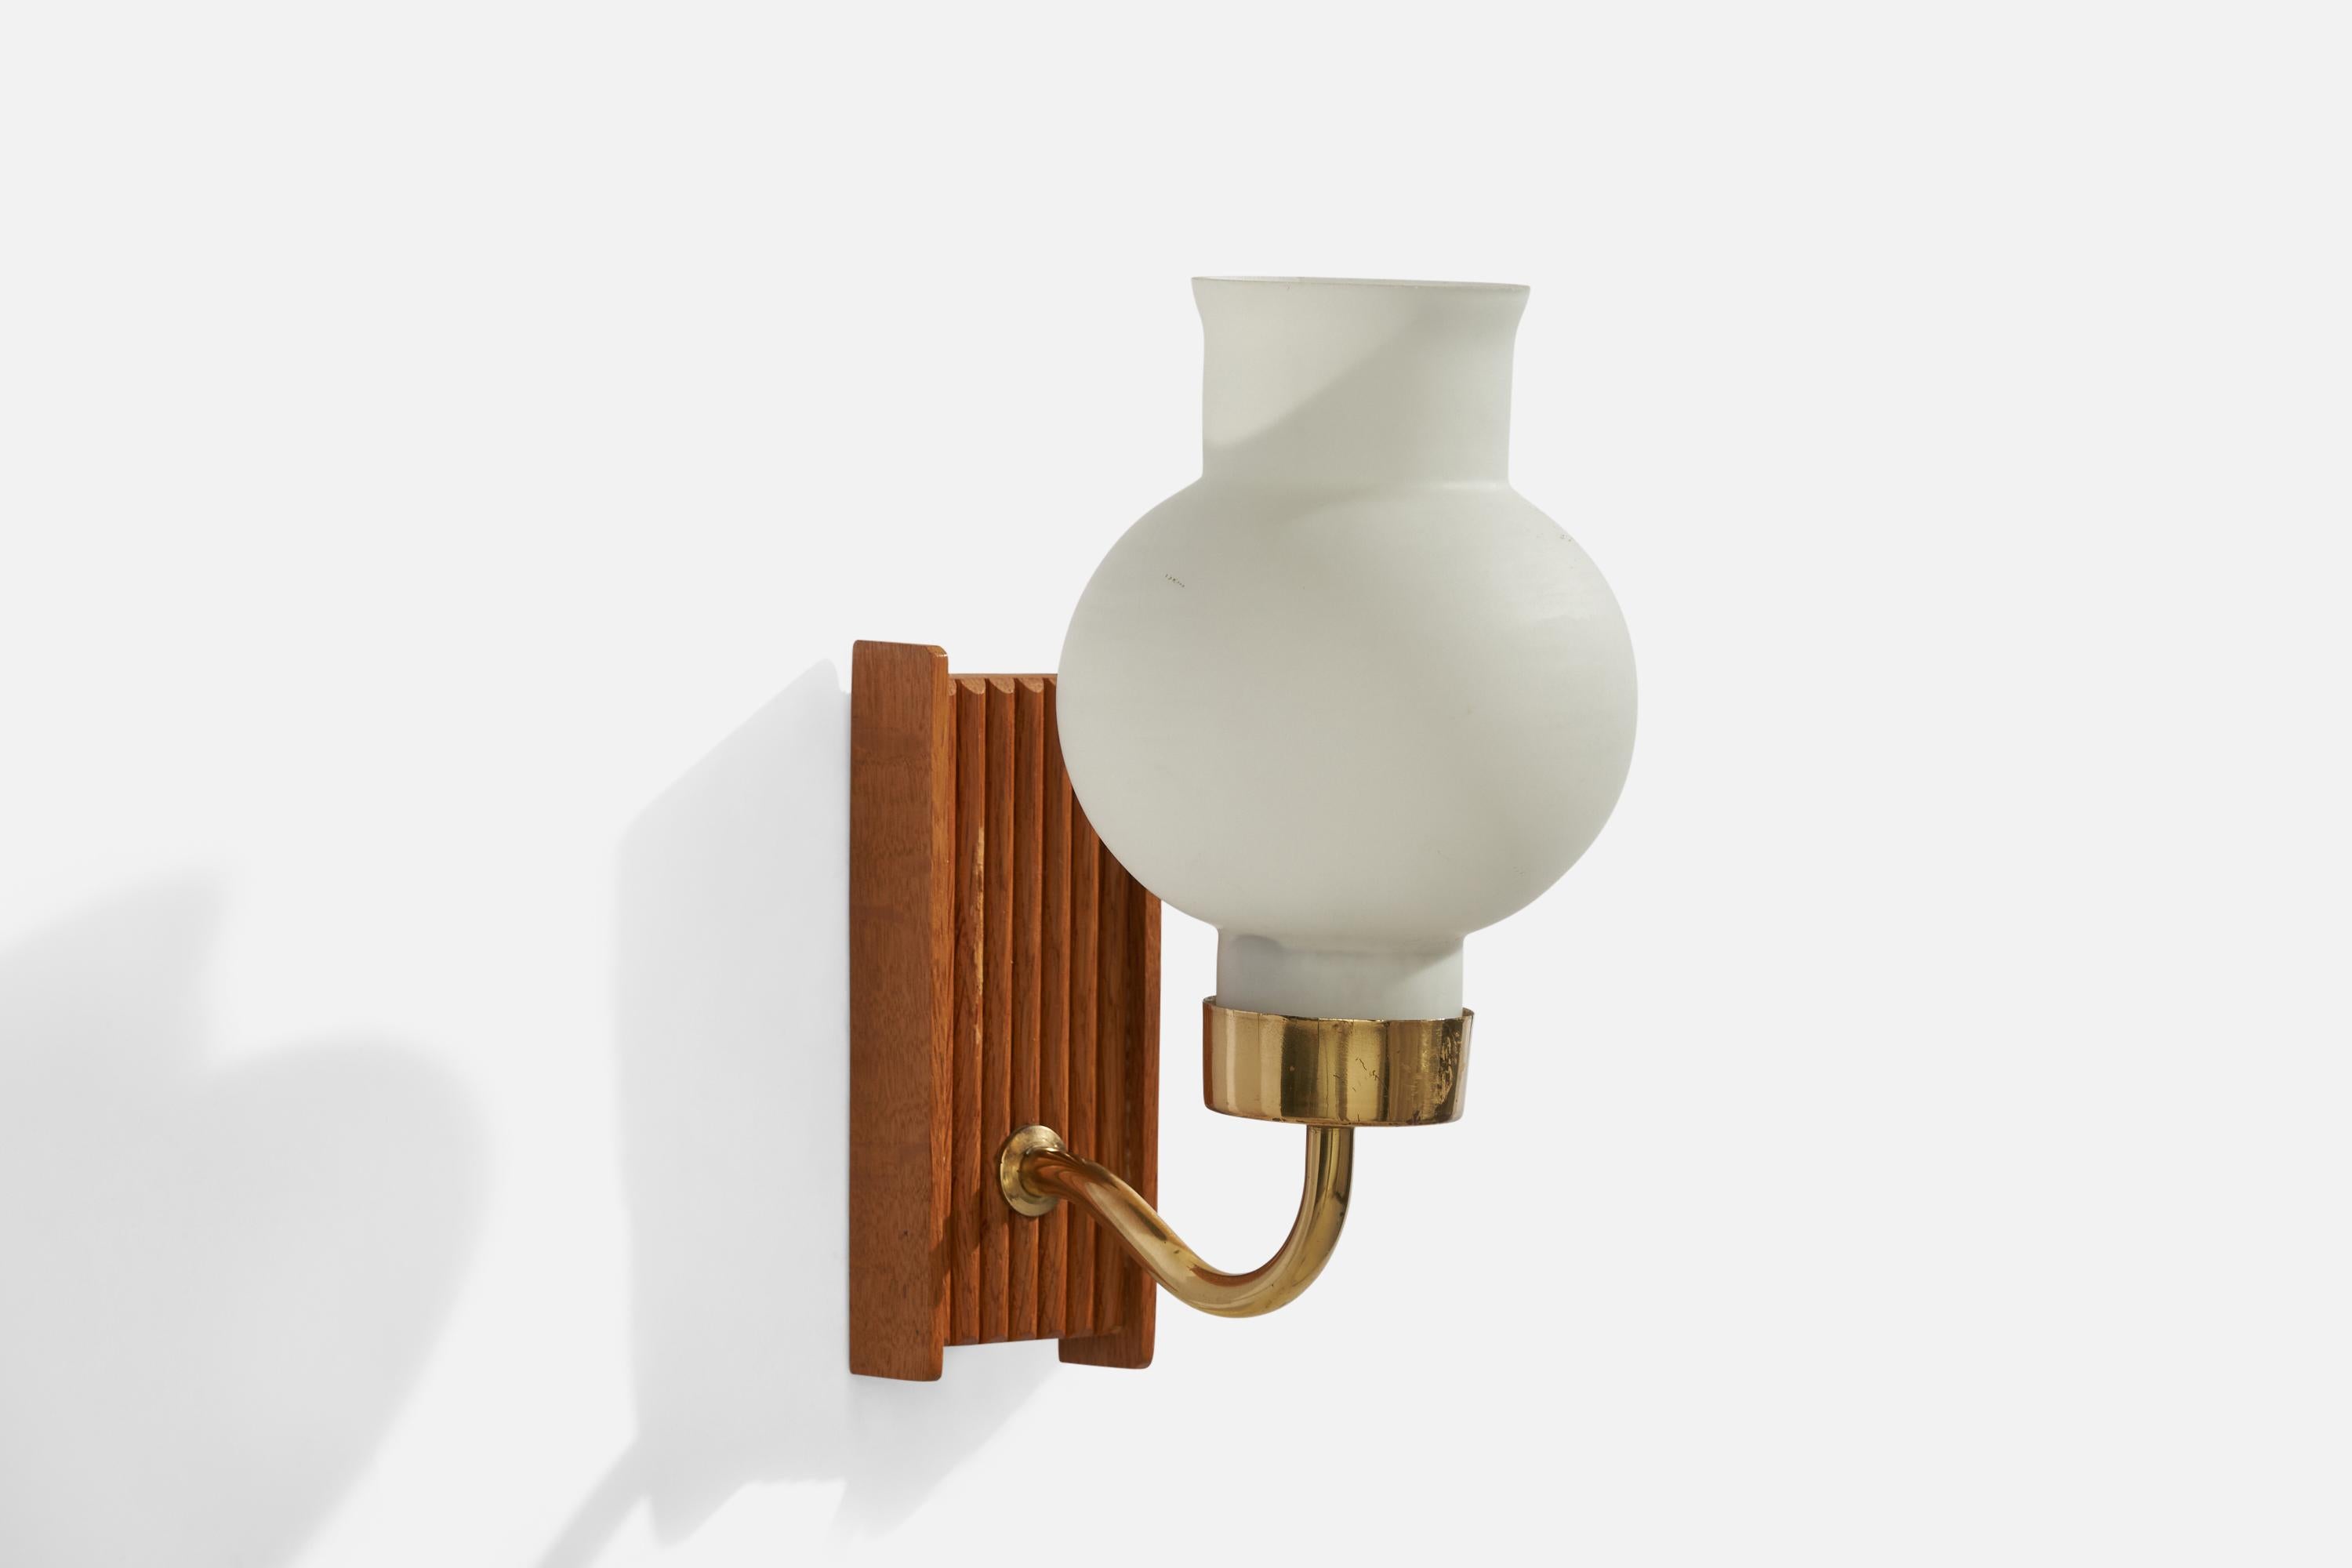 An oak, brass and opaline glass wall light designed and produced in Sweden, 1950s.

Overall Dimensions (inches): 8.75”  H x 4” W x 6.75” D
Back Plate Dimensions (inches): 5.75” H x 2.25” W x 1” D
Bulb Specifications: E-14 Bulb
Number of Sockets: